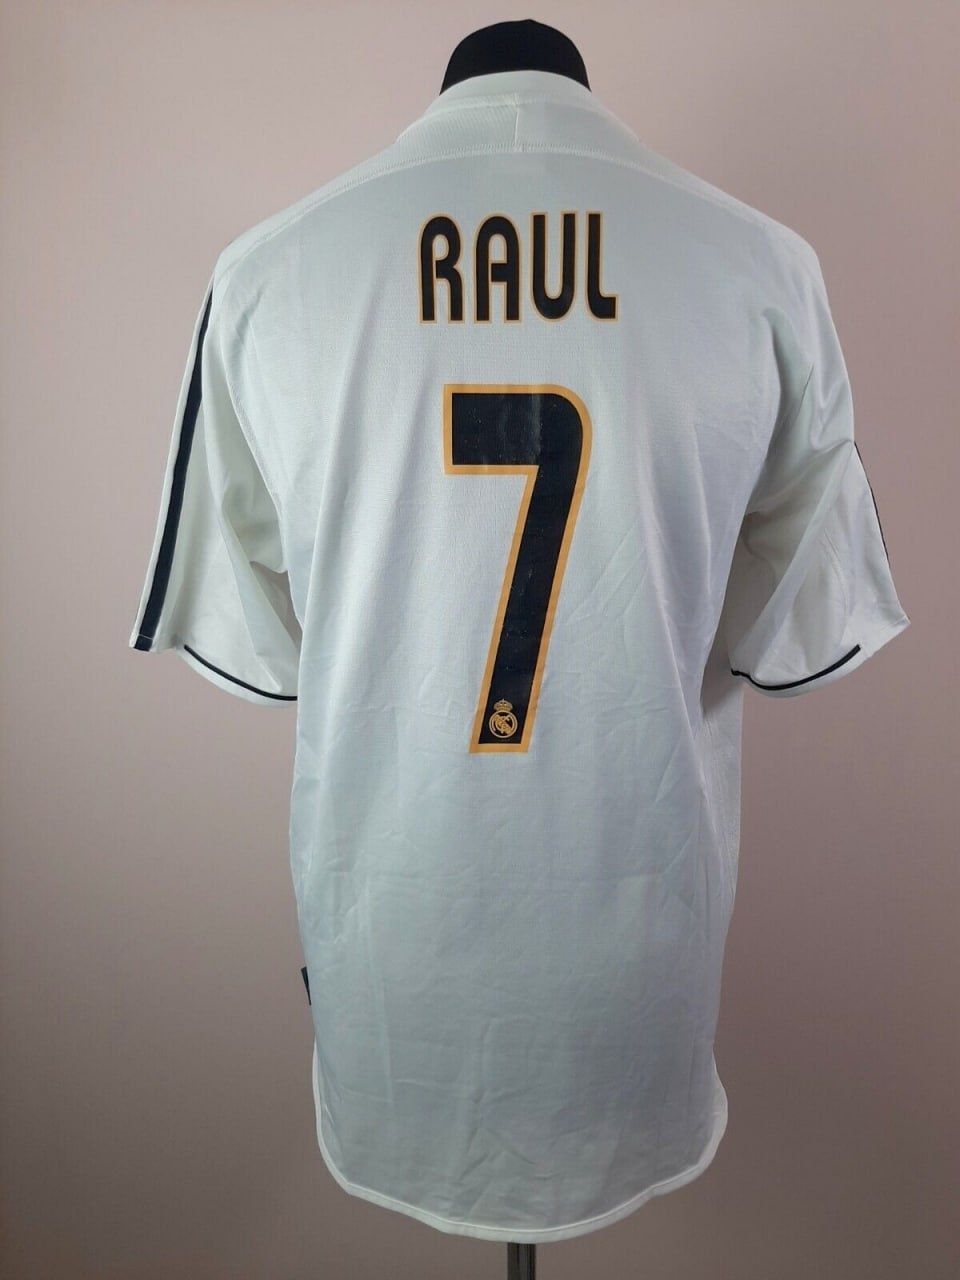 Real Madrid jersey 2003